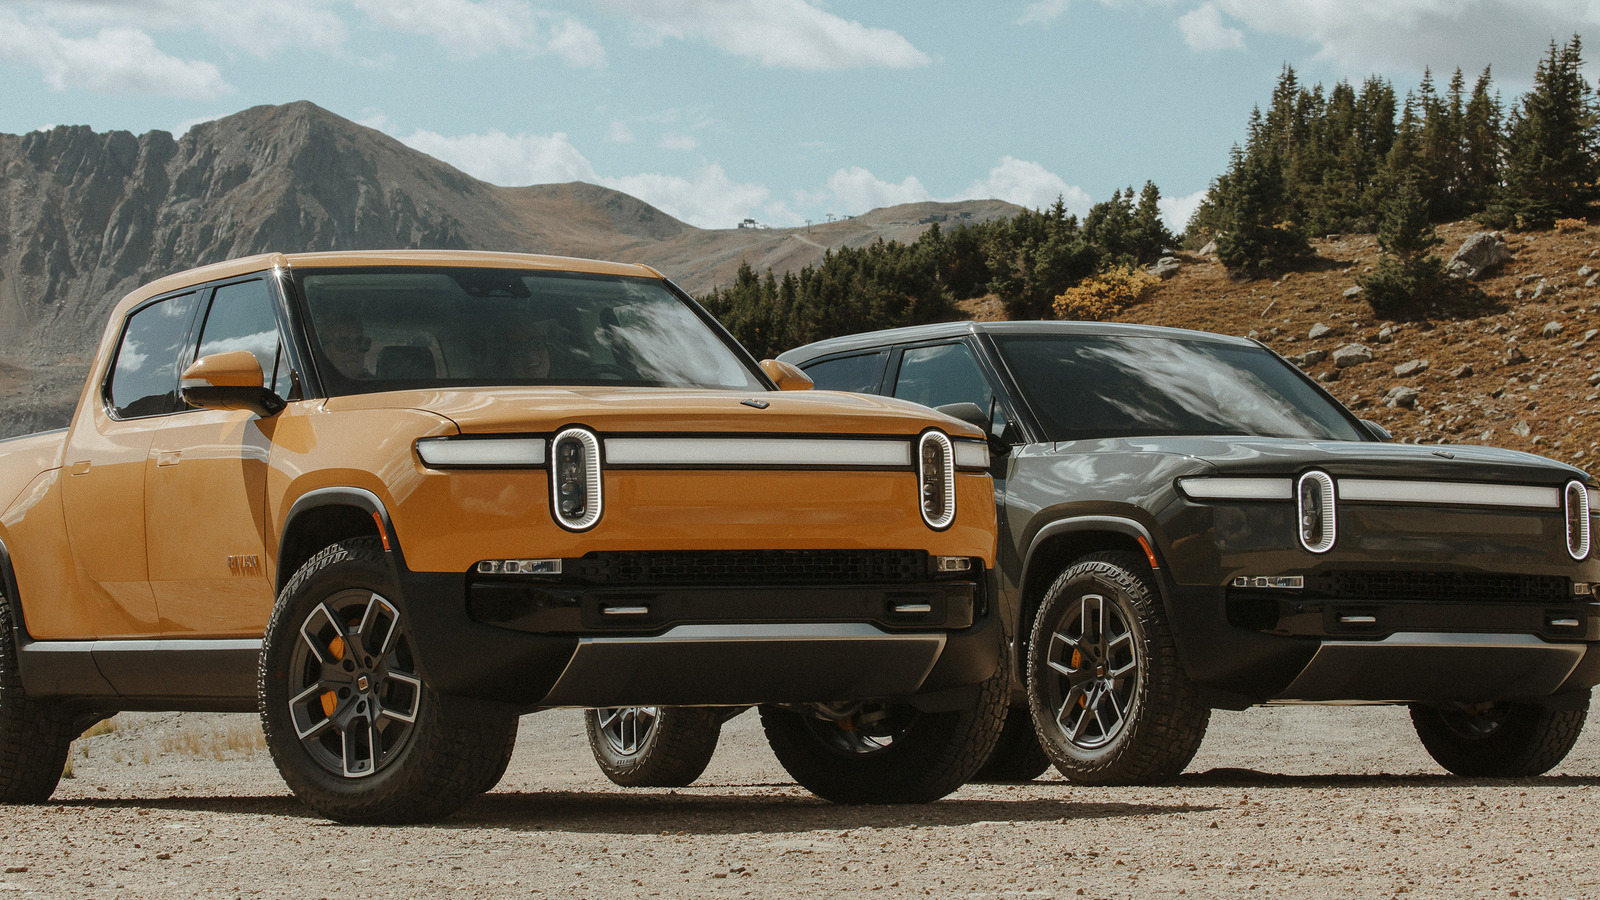 How Will Rivian Handle Future Pricing Decisions & Avoid Making Similar Mistakes?